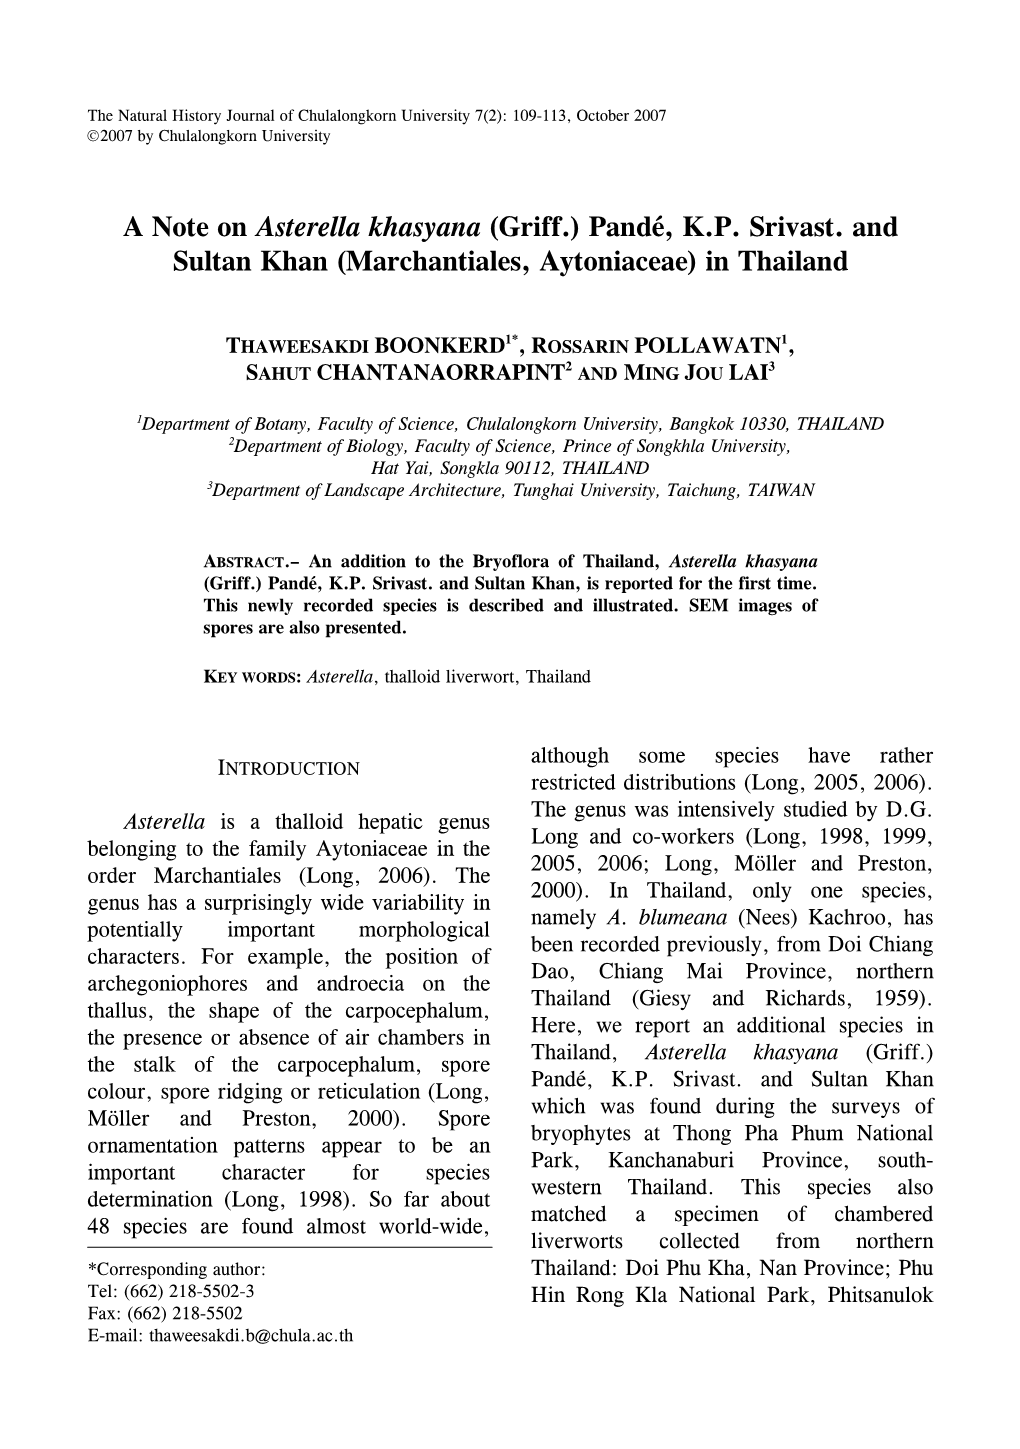 A Note on Asterella Khasyana (Griff.) Pandé, K.P. Srivast. and Sultan Khan (Marchantiales, Aytoniaceae) in Thailand